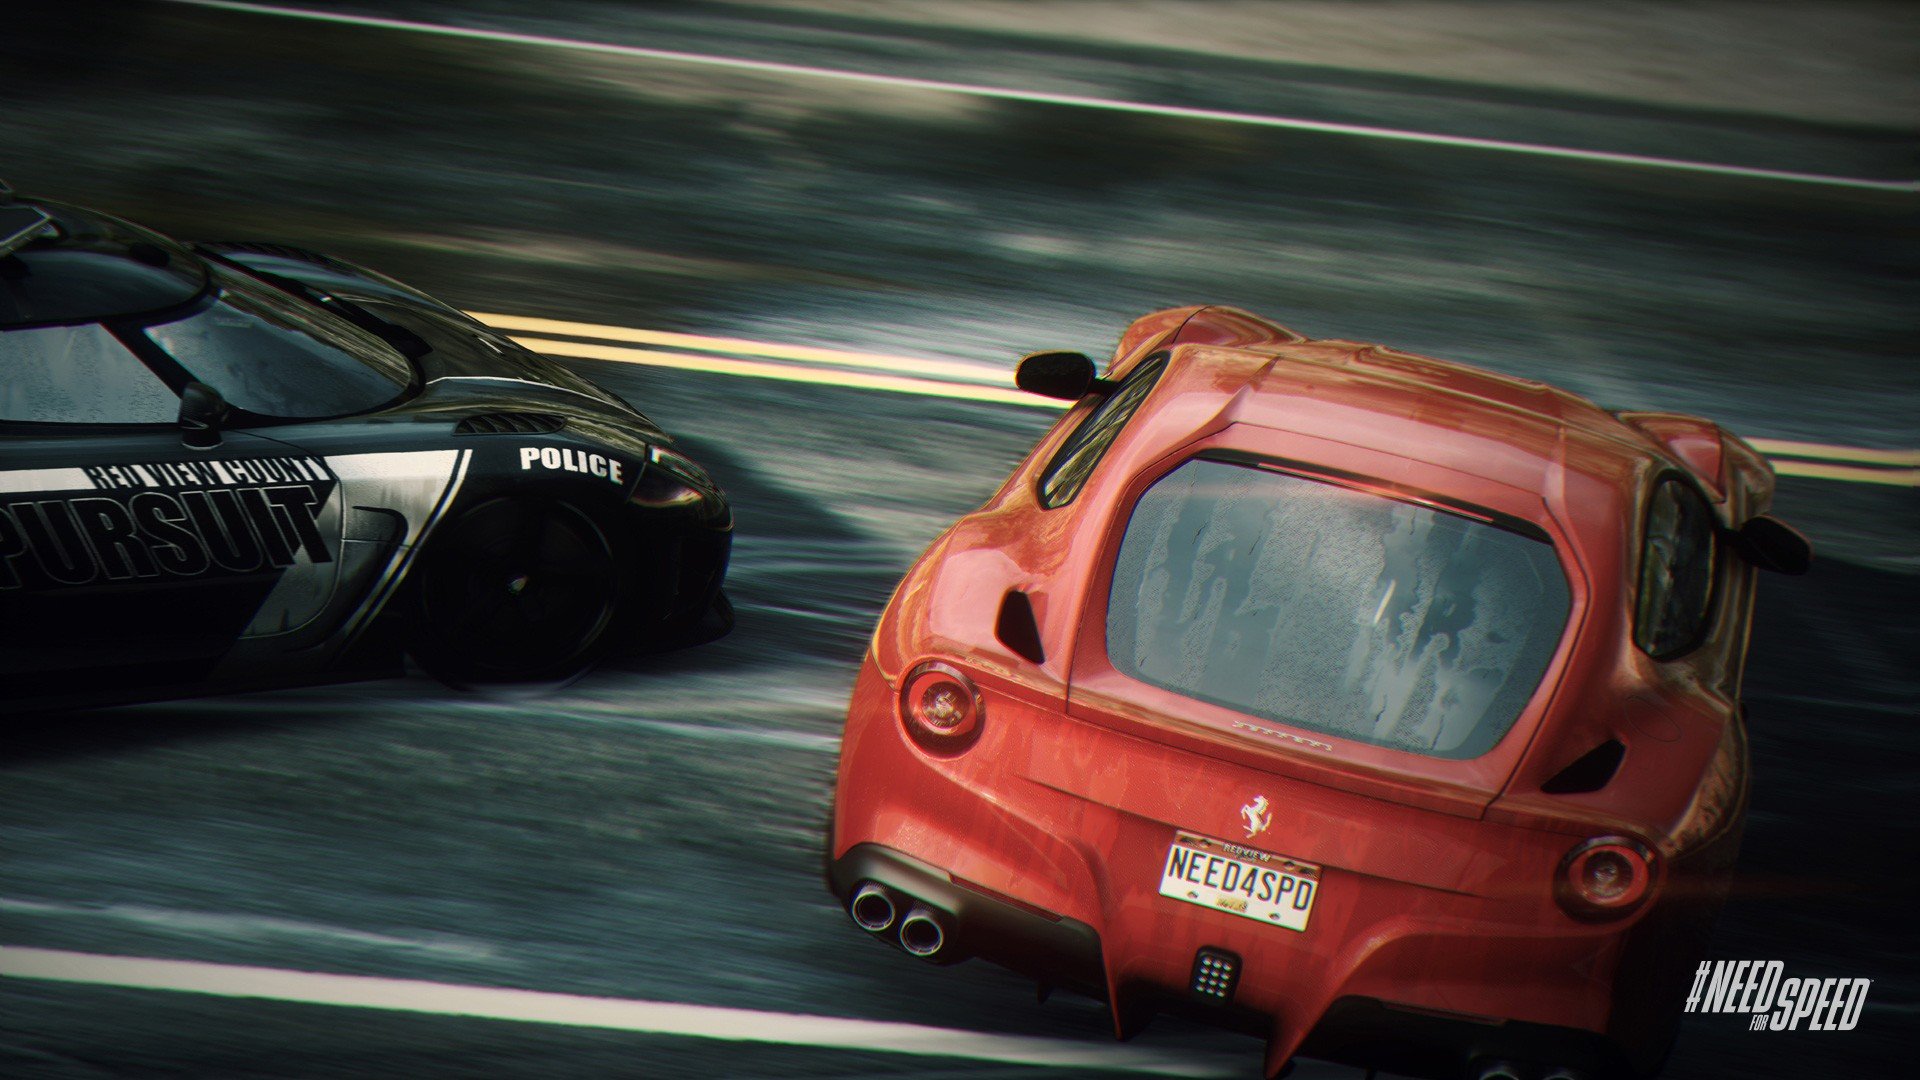 Best Need For Speed: Rivals wallpaper ID:259555 for High Resolution full hd 1080p desktop